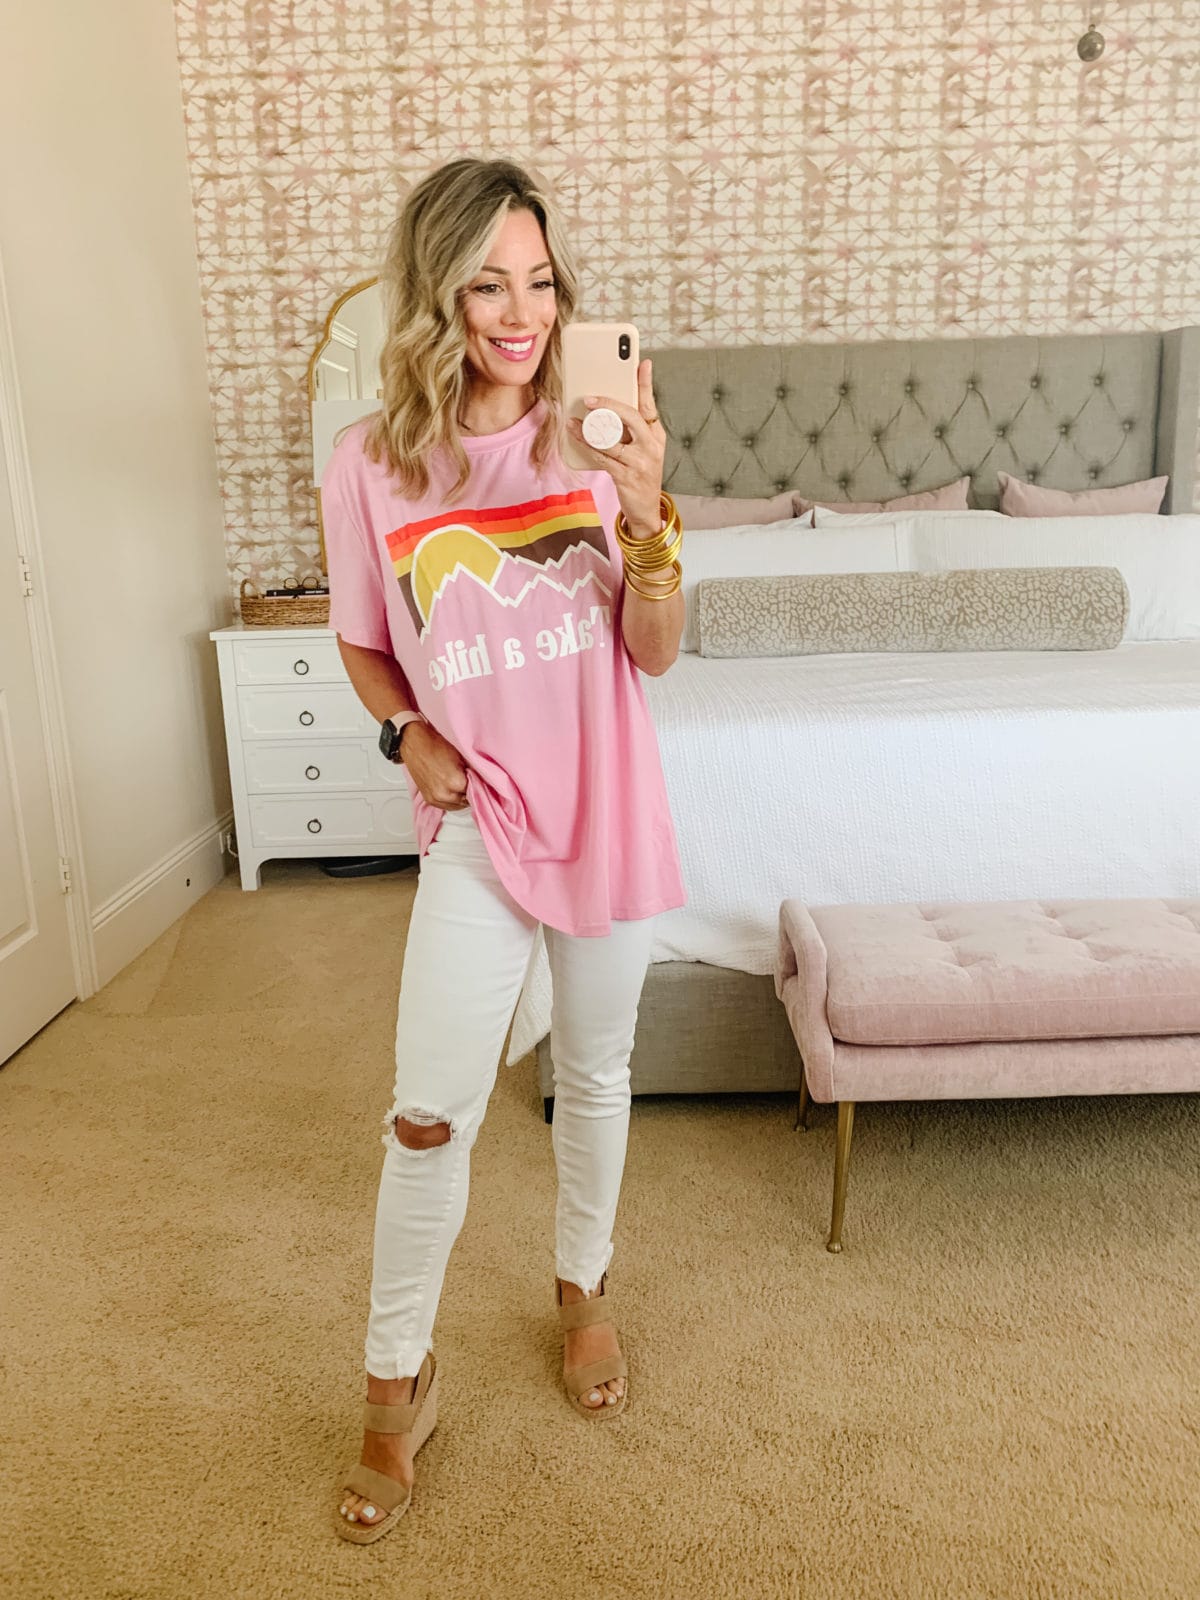 Amazon Fashion Faves, Graphic Tee and White Jeans with Wedges 